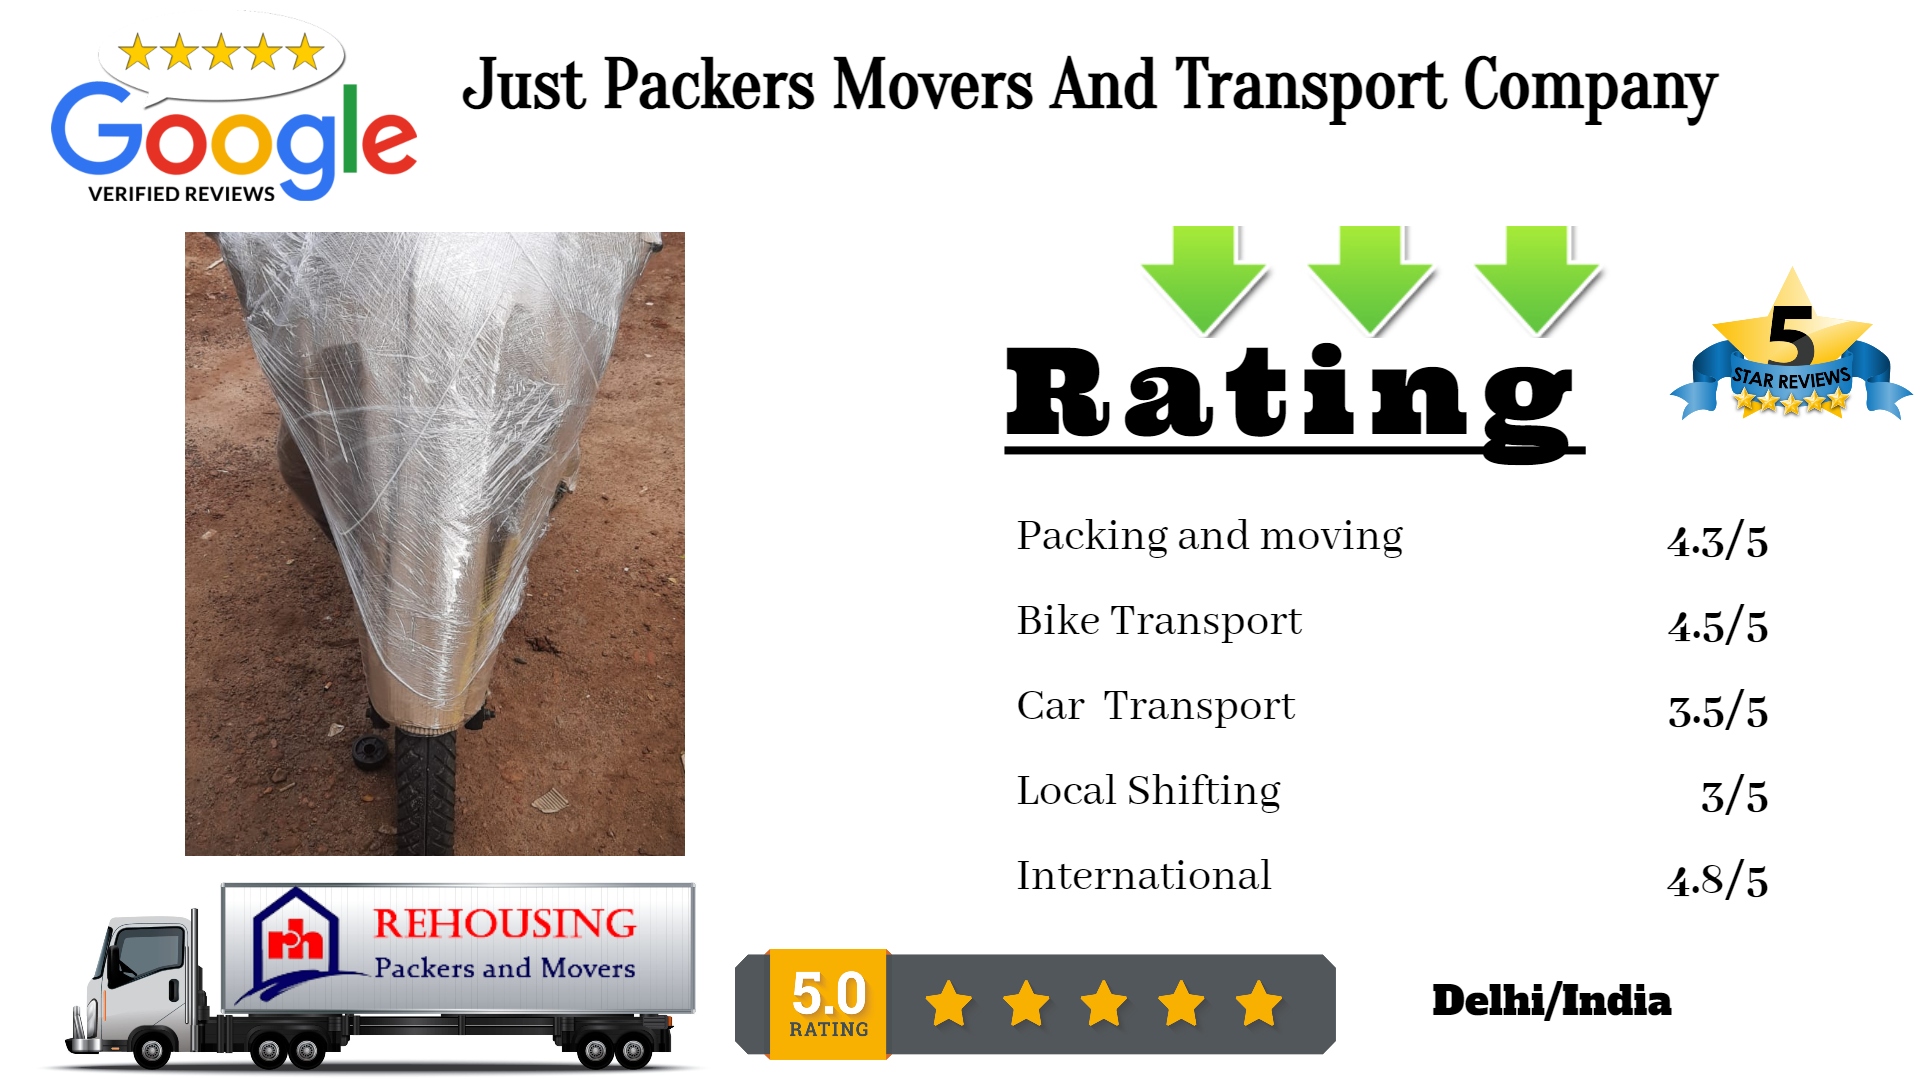 Just Packers Movers East of Kailash, New Delhi,110065